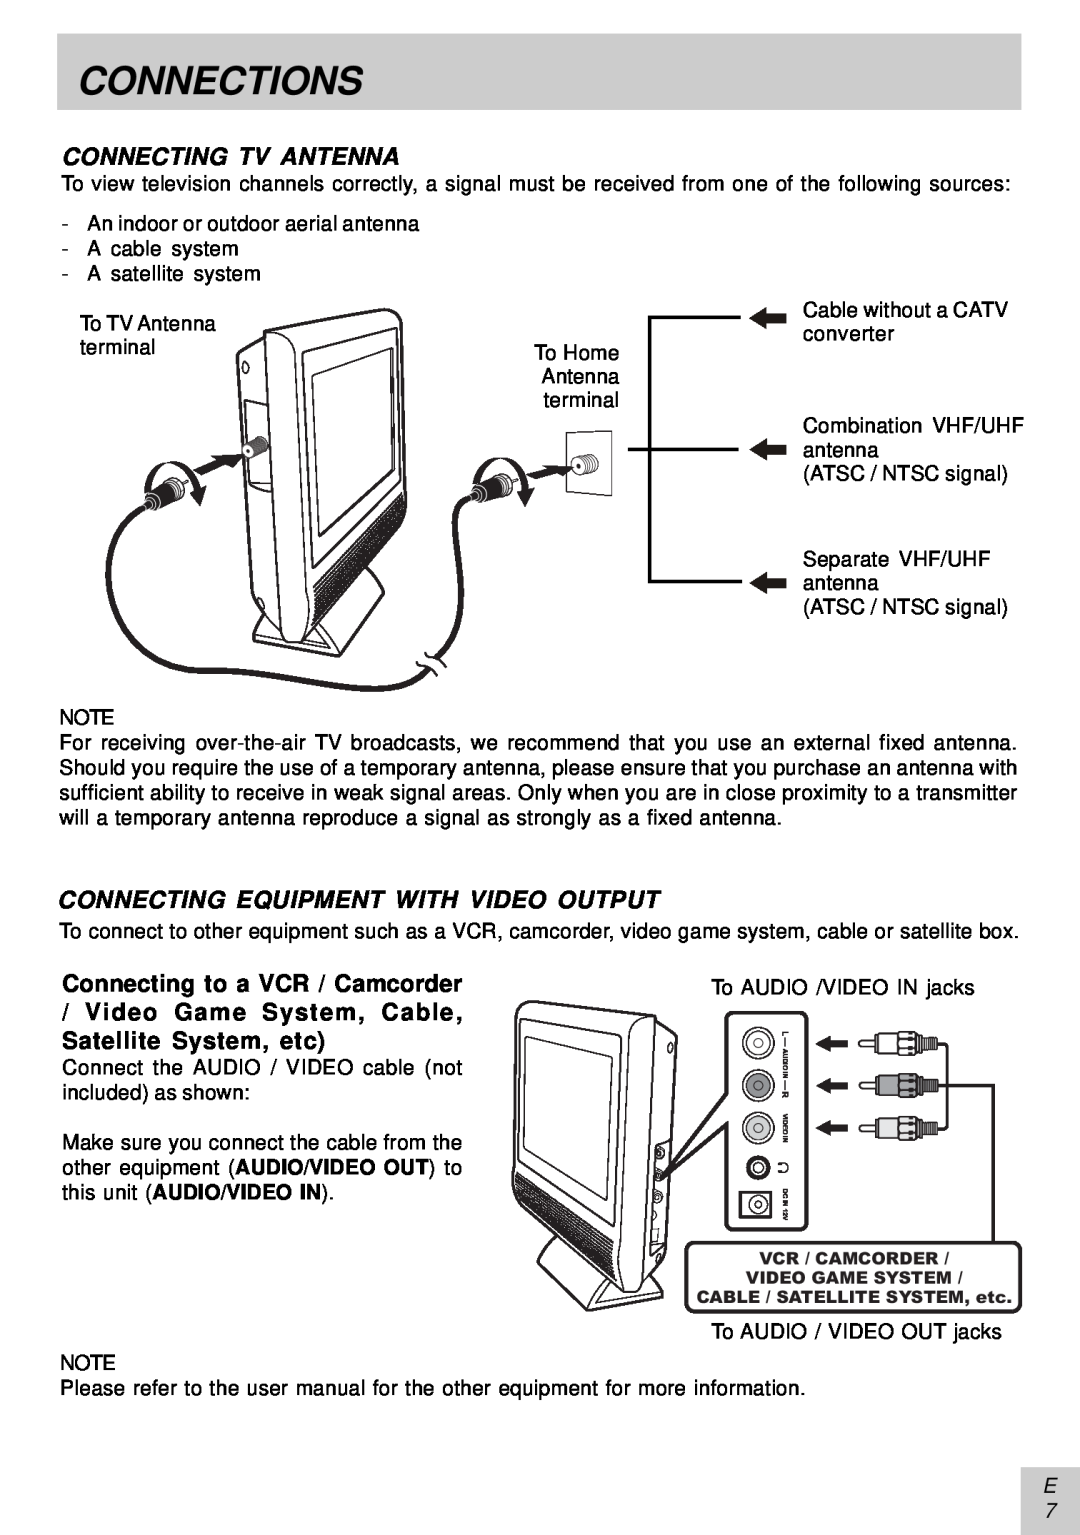 Audiovox PLV16081 instruction manual Connections, Connecting Tv Antenna, Connecting Equipment With Video Output 